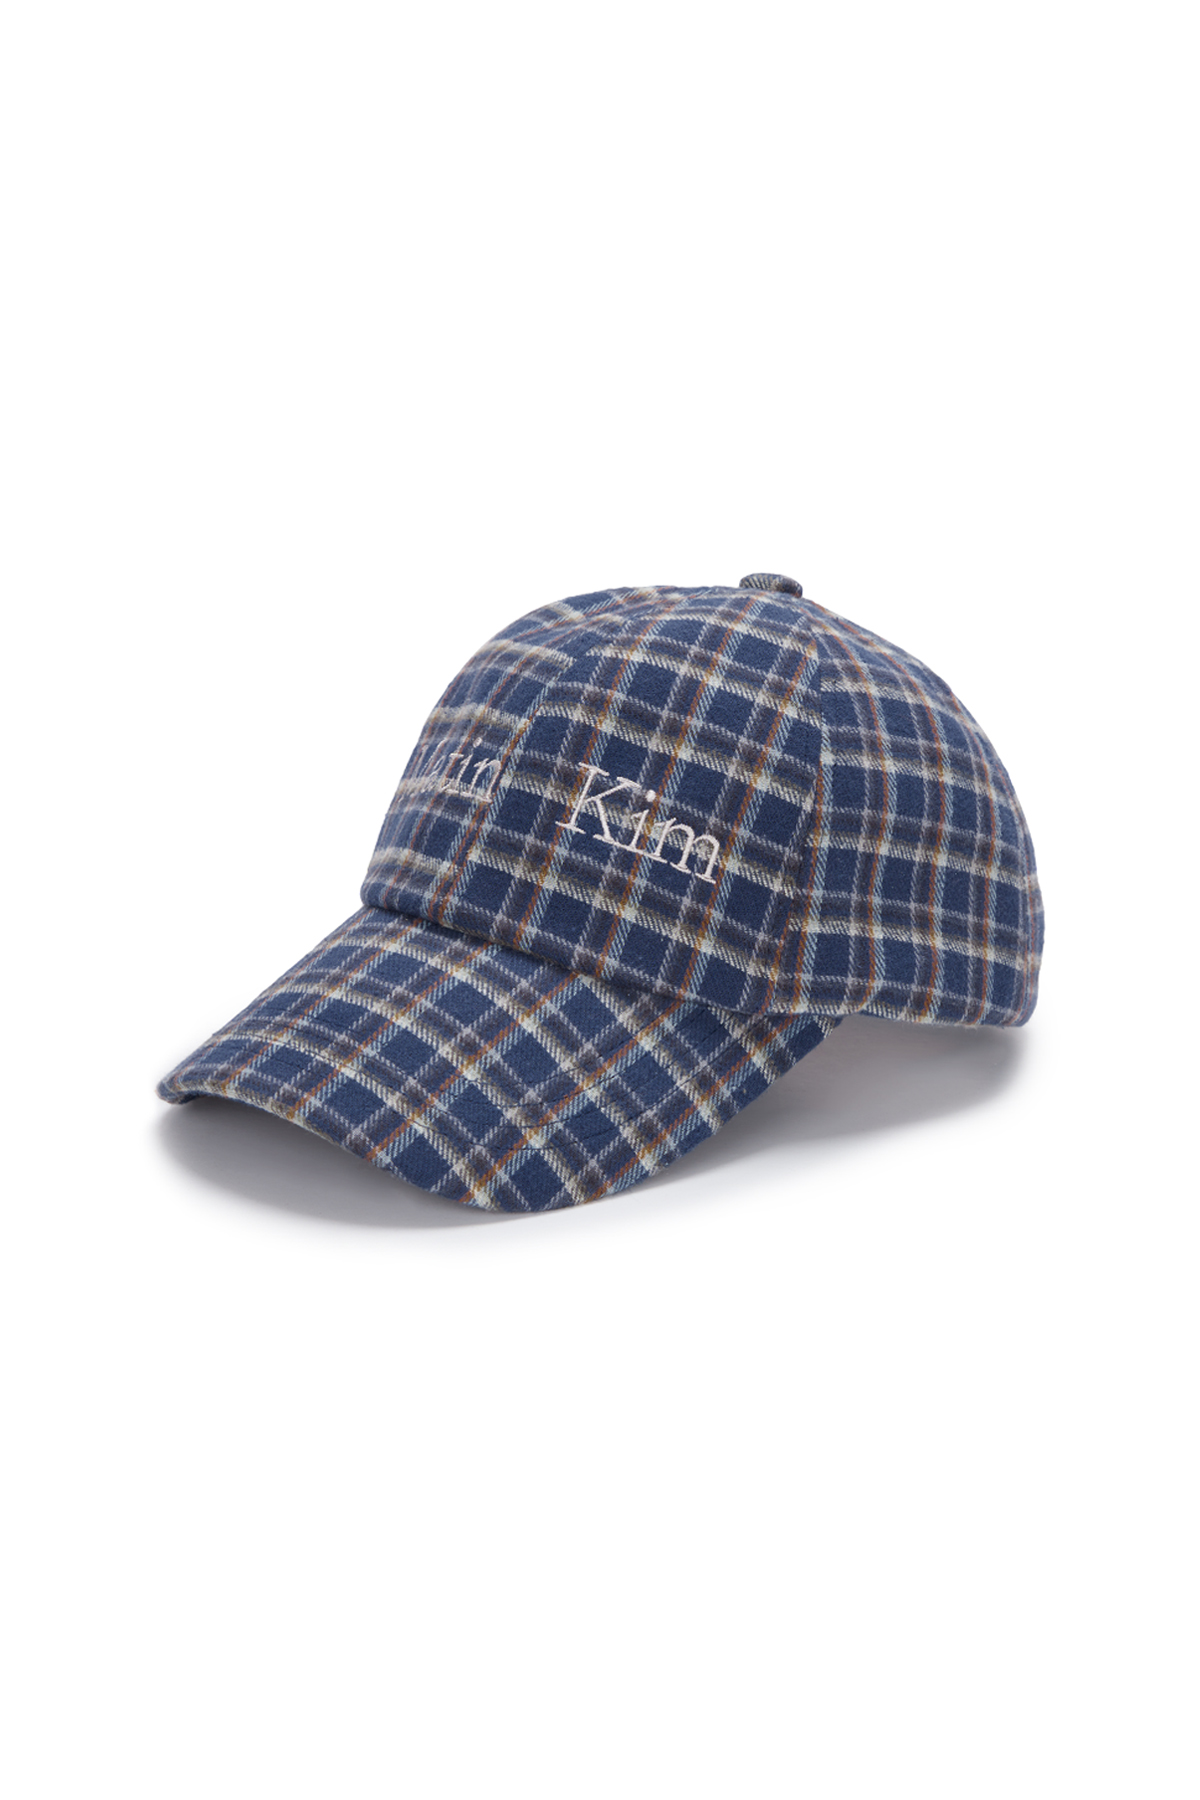 CHECK PATTERN BALL CAP IN BLUE